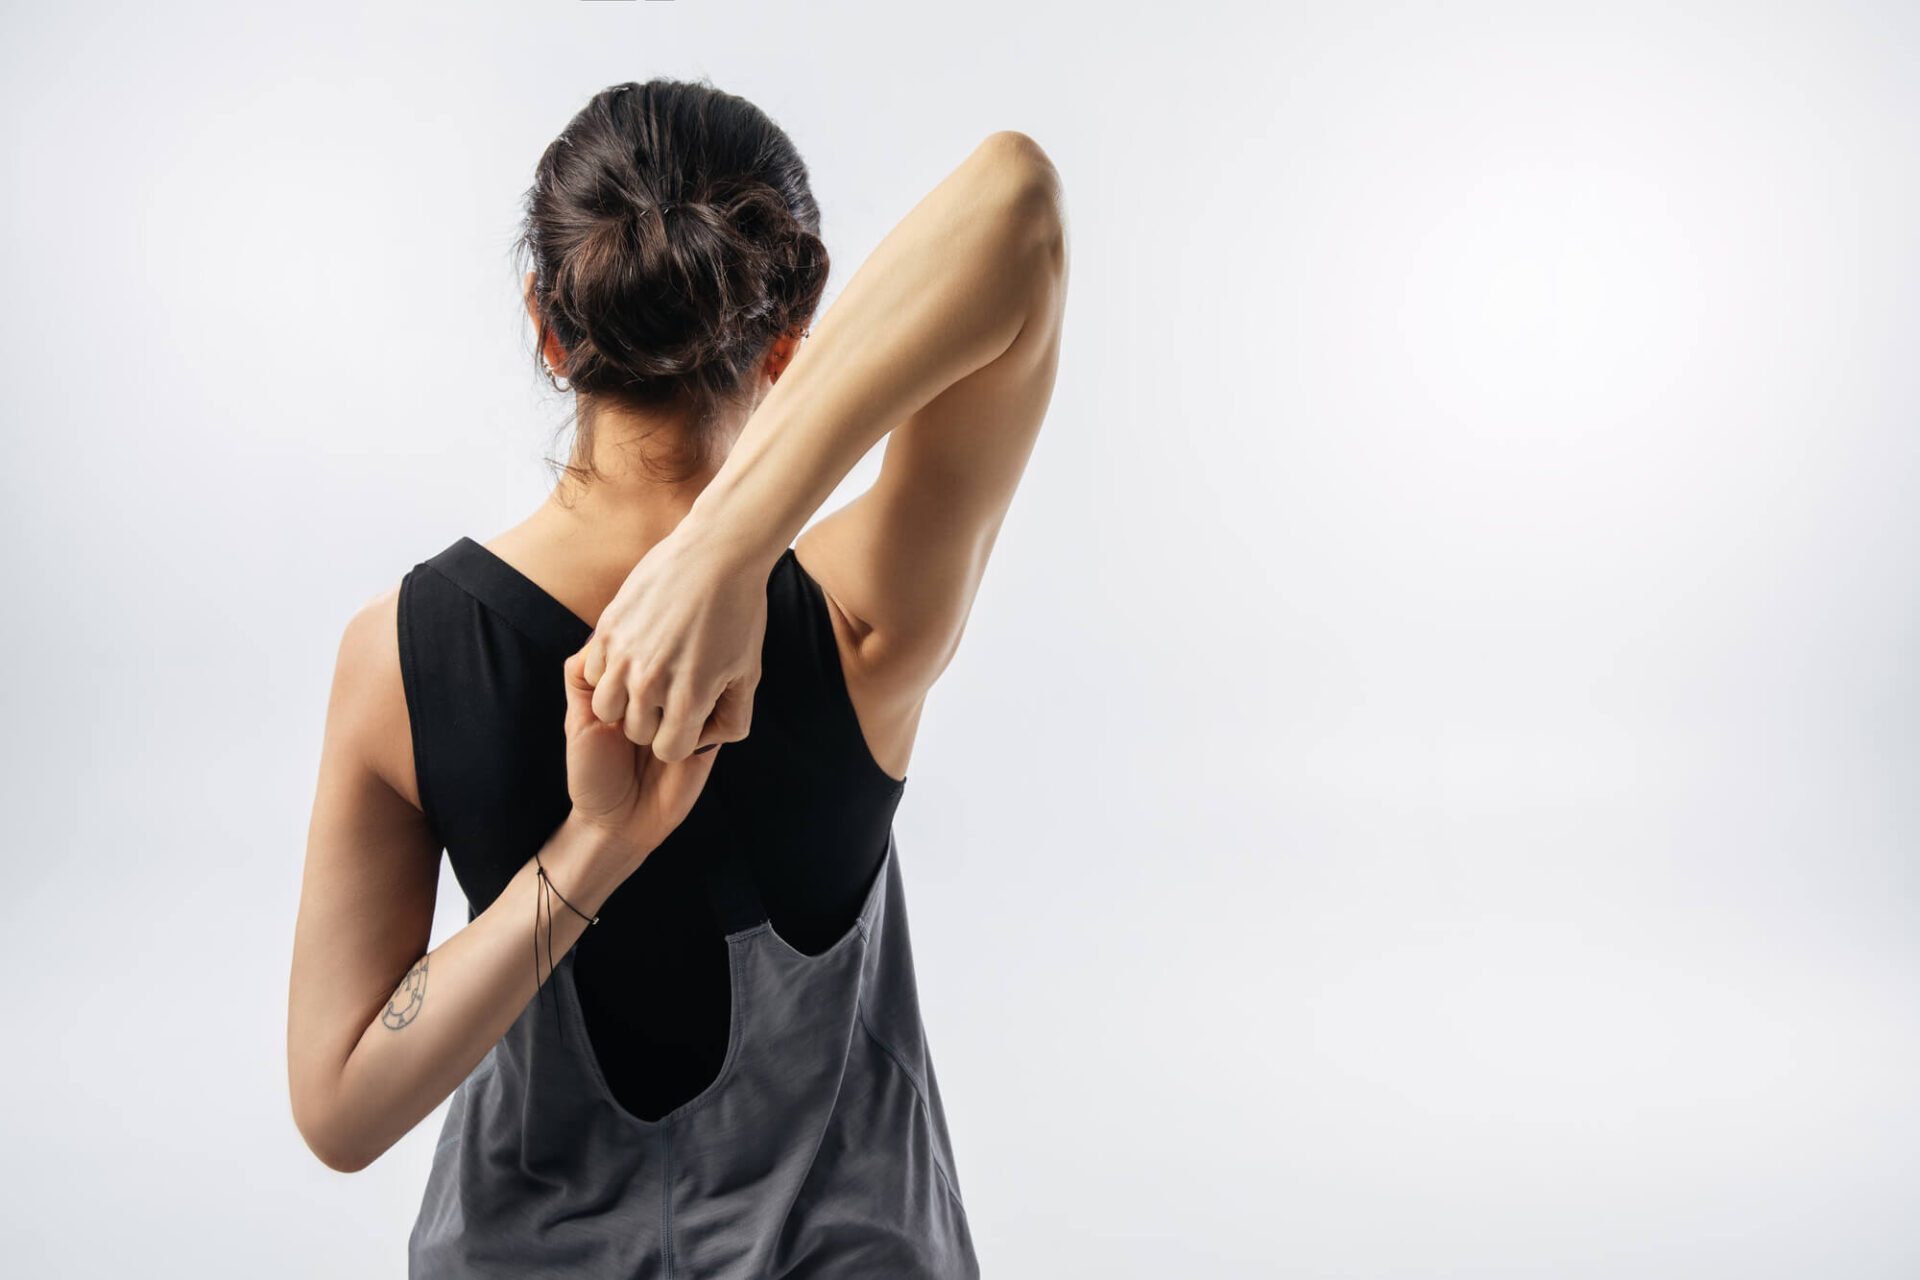 Helpful Tips for Stretching Safely Before and After Working Out